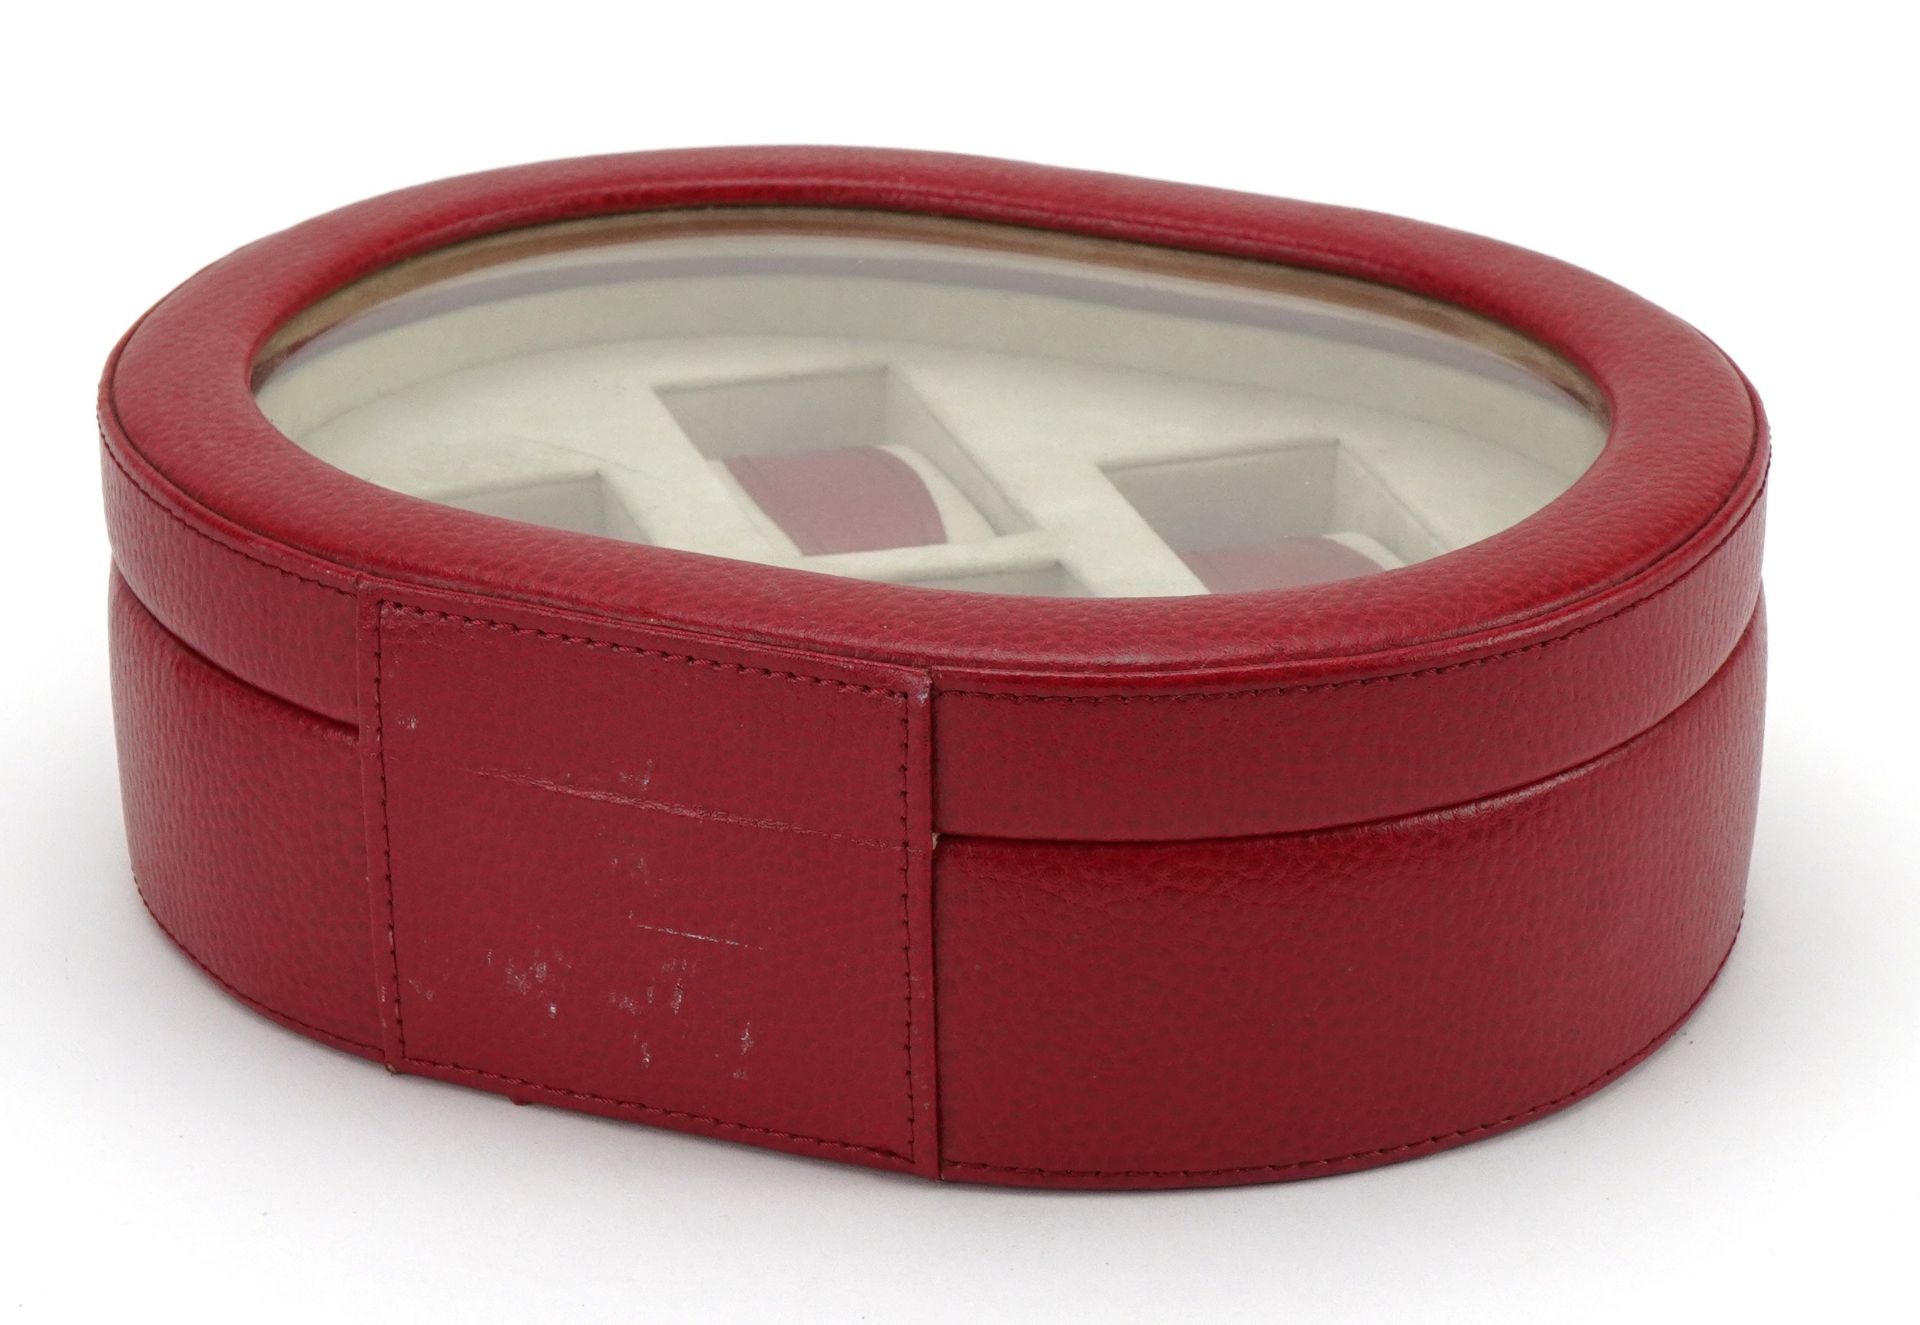 Red leather and suede wristwatch display case, 7.5cm H x 23.5cm W x 18.5cm D - Image 3 of 4